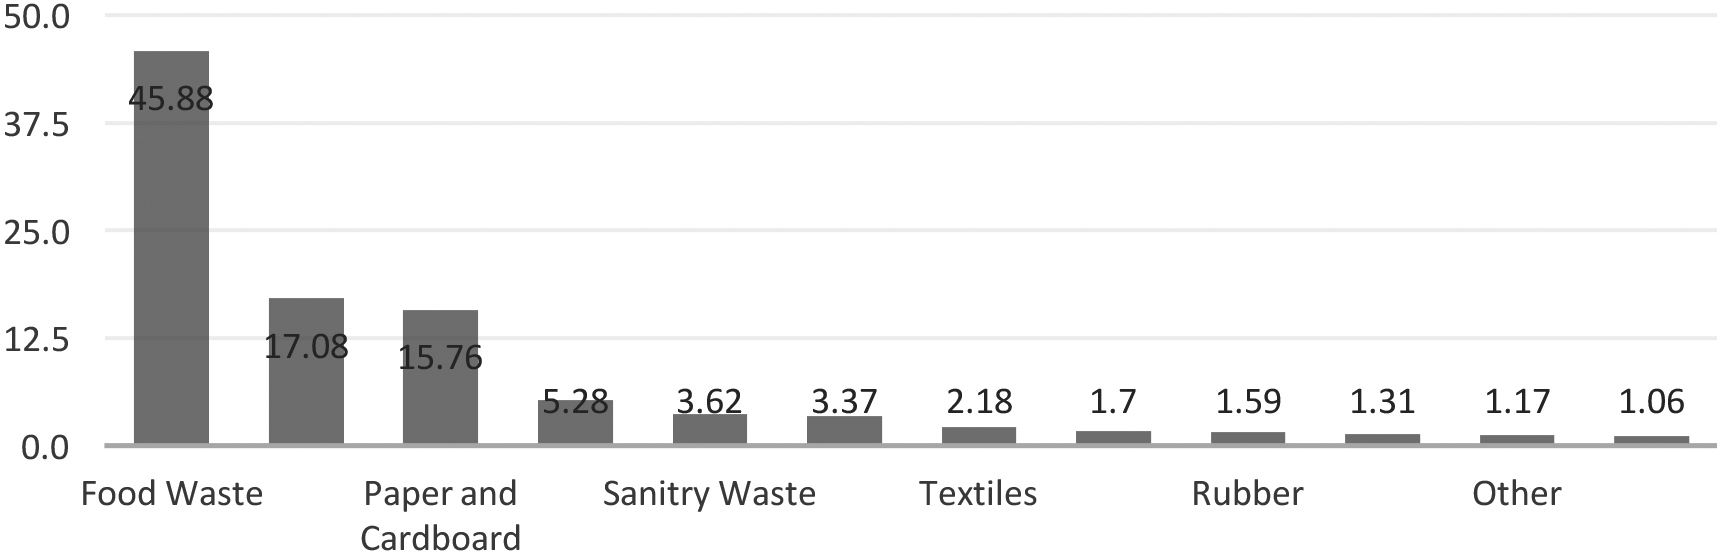 Waste composition in percent, Bhutan 2019.